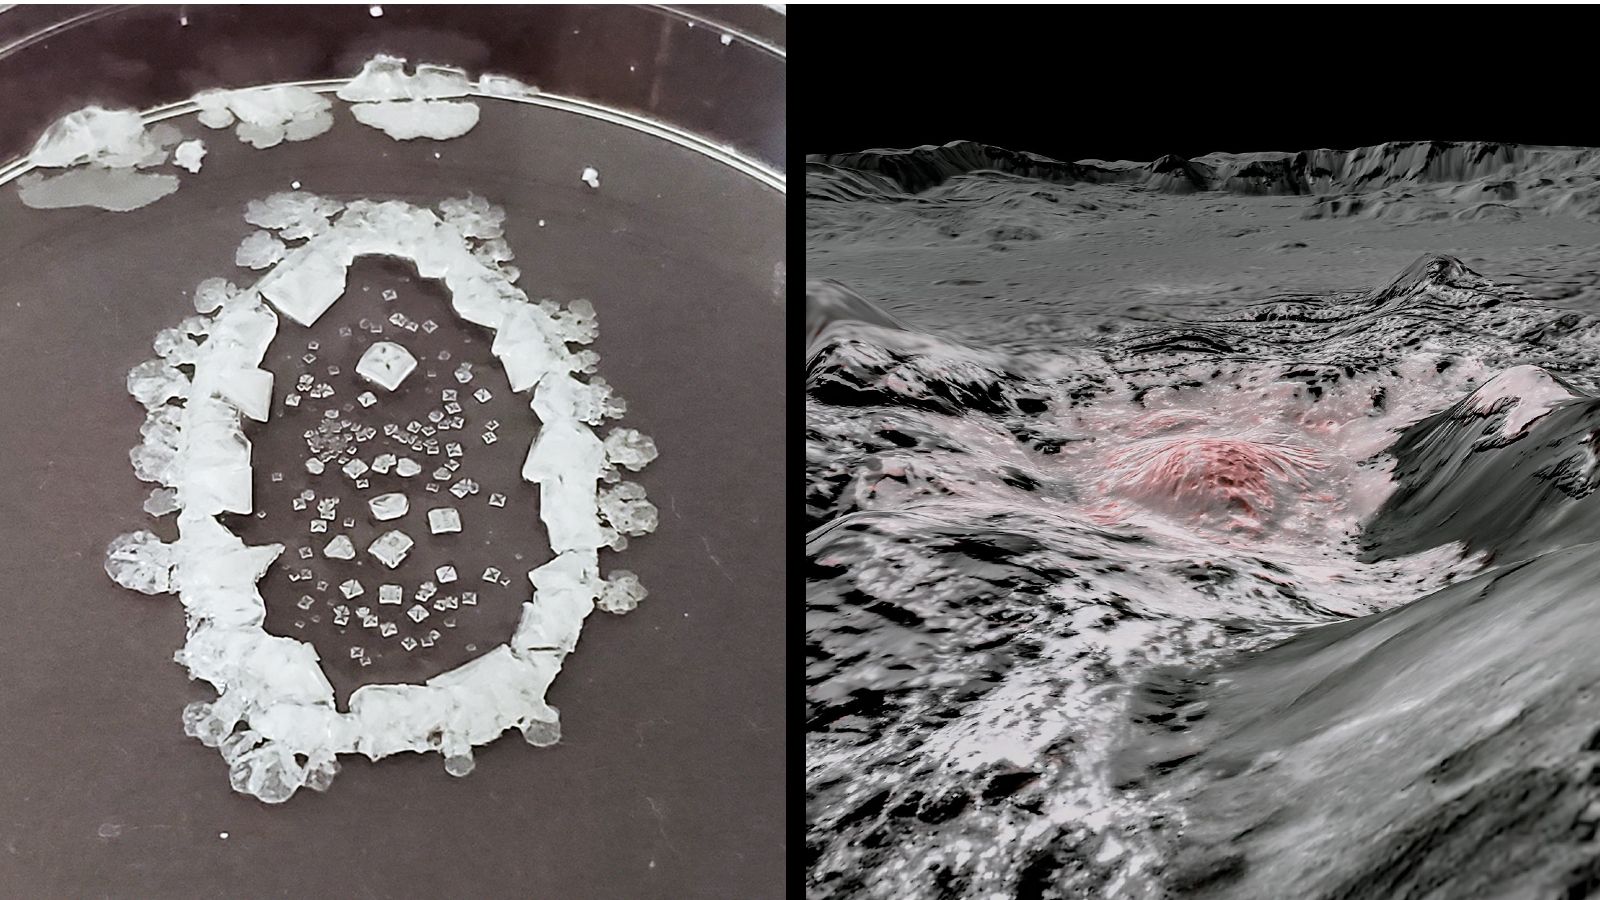 Side-by-side images showing a dried table salt solution and a close-up view of salt deposits on the dwarf planet Ceres